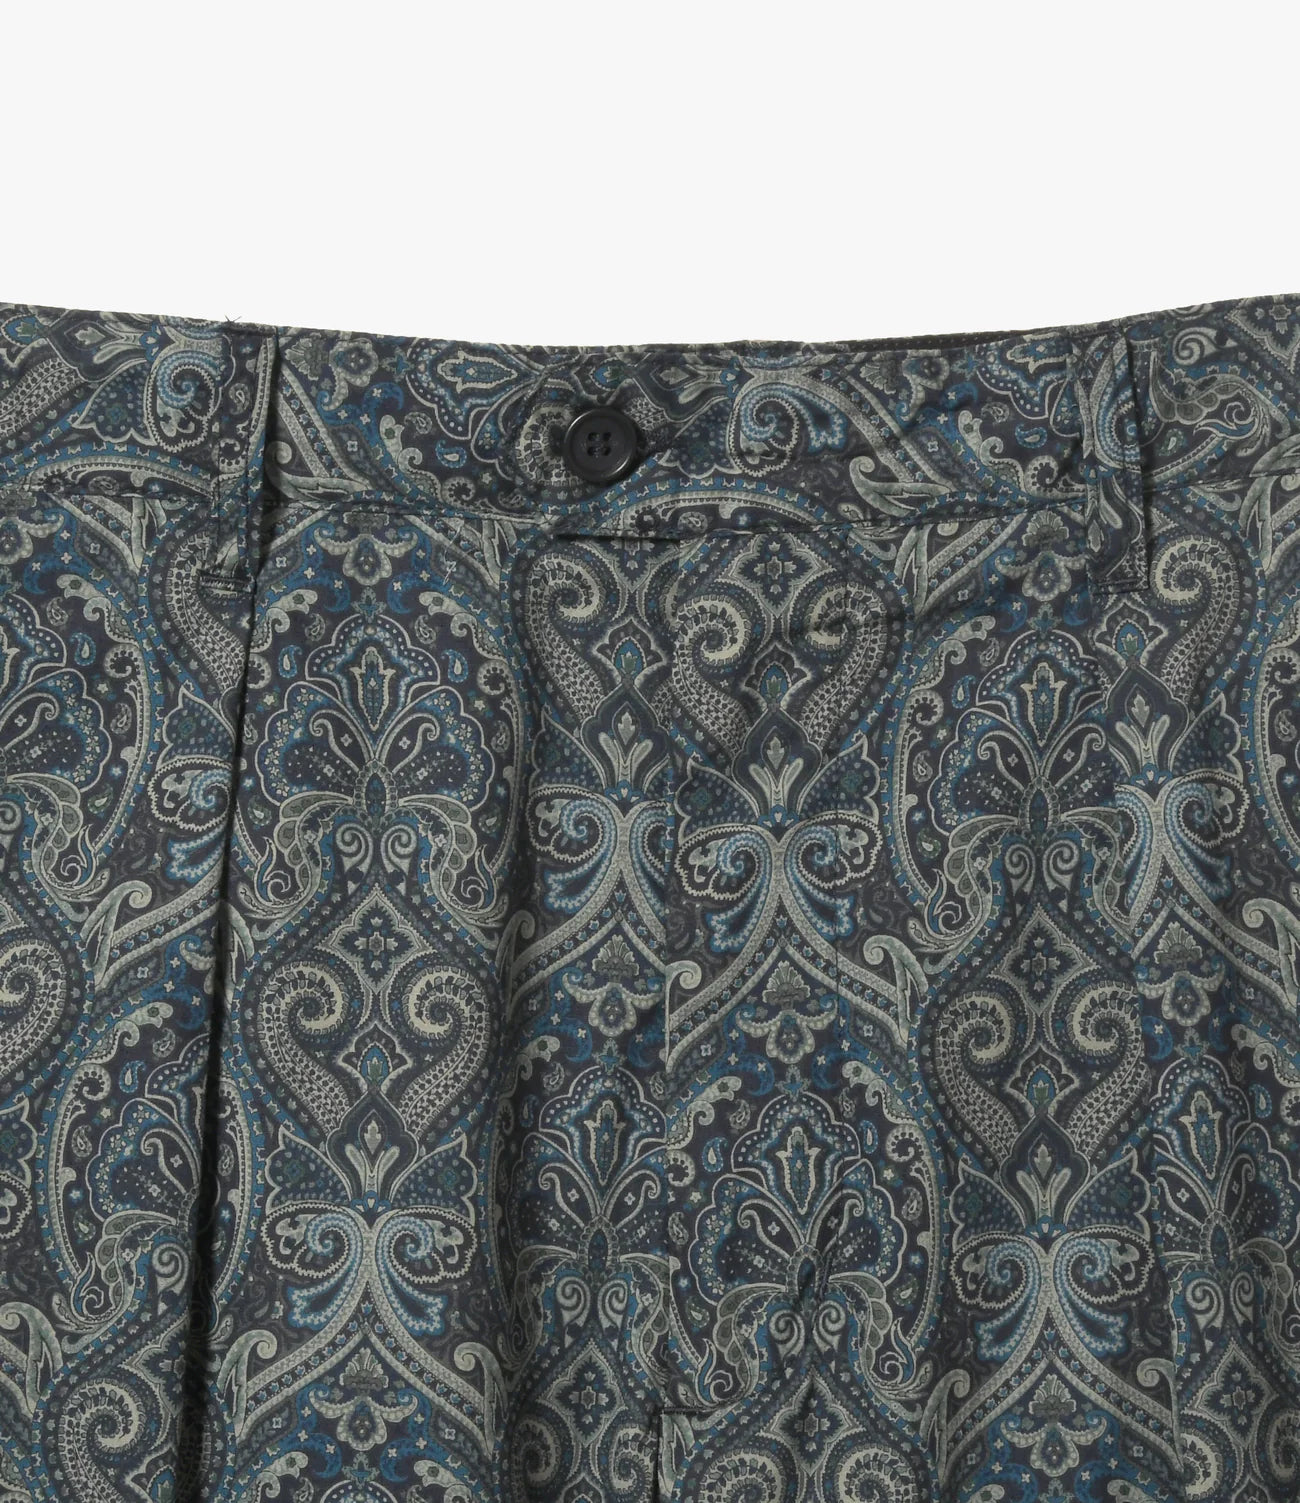 Engineered Garments Nepenthes SP Carlyle Pant - Navy Cotton Paisley Print